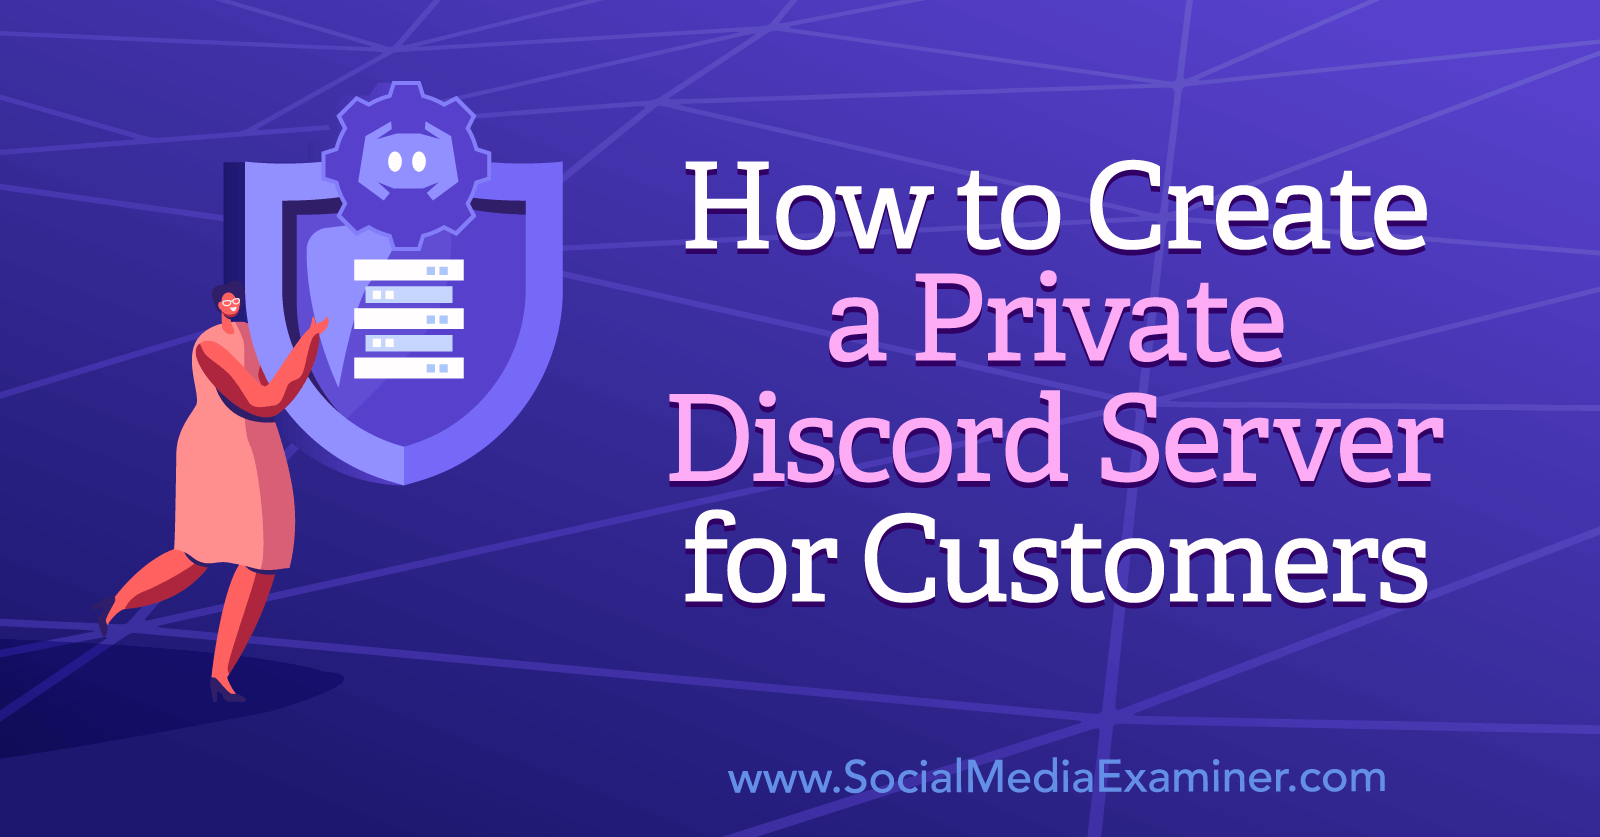 How to Create a Private Discord Server for Customers by Corinna Keefe on Social Media Examiner.